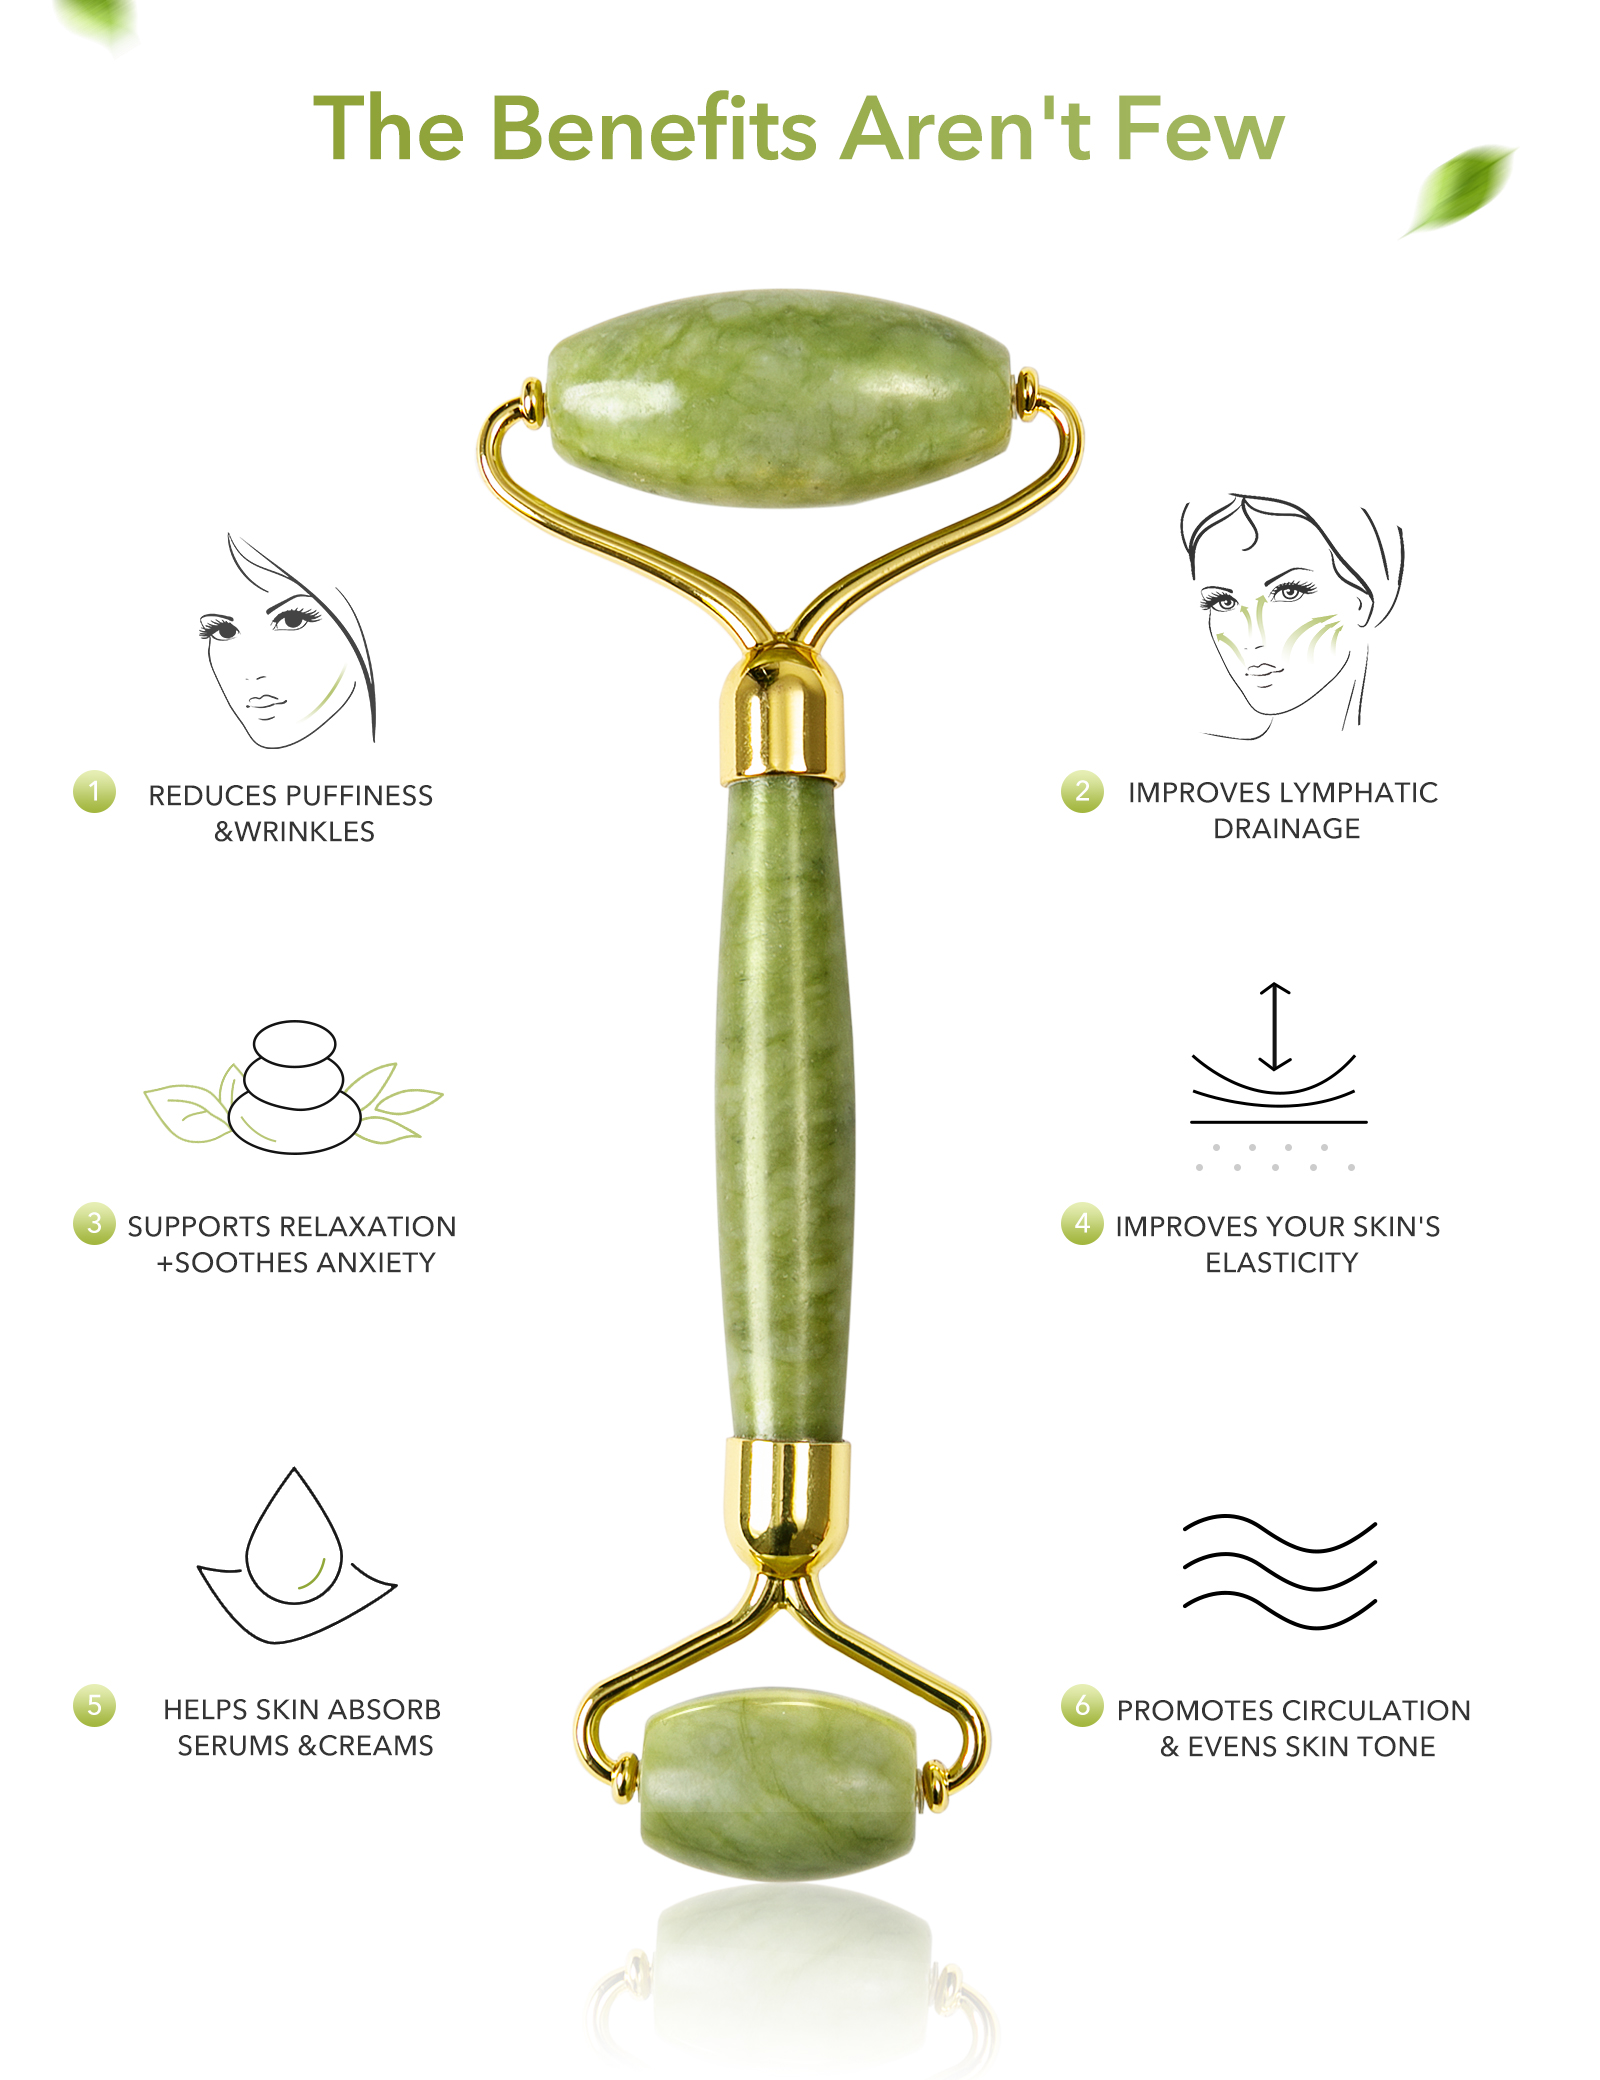 HANABEE Women Gua Sha Jade, Face Roller for Puffy Eyes, Facial Kit Gift - image 6 of 7